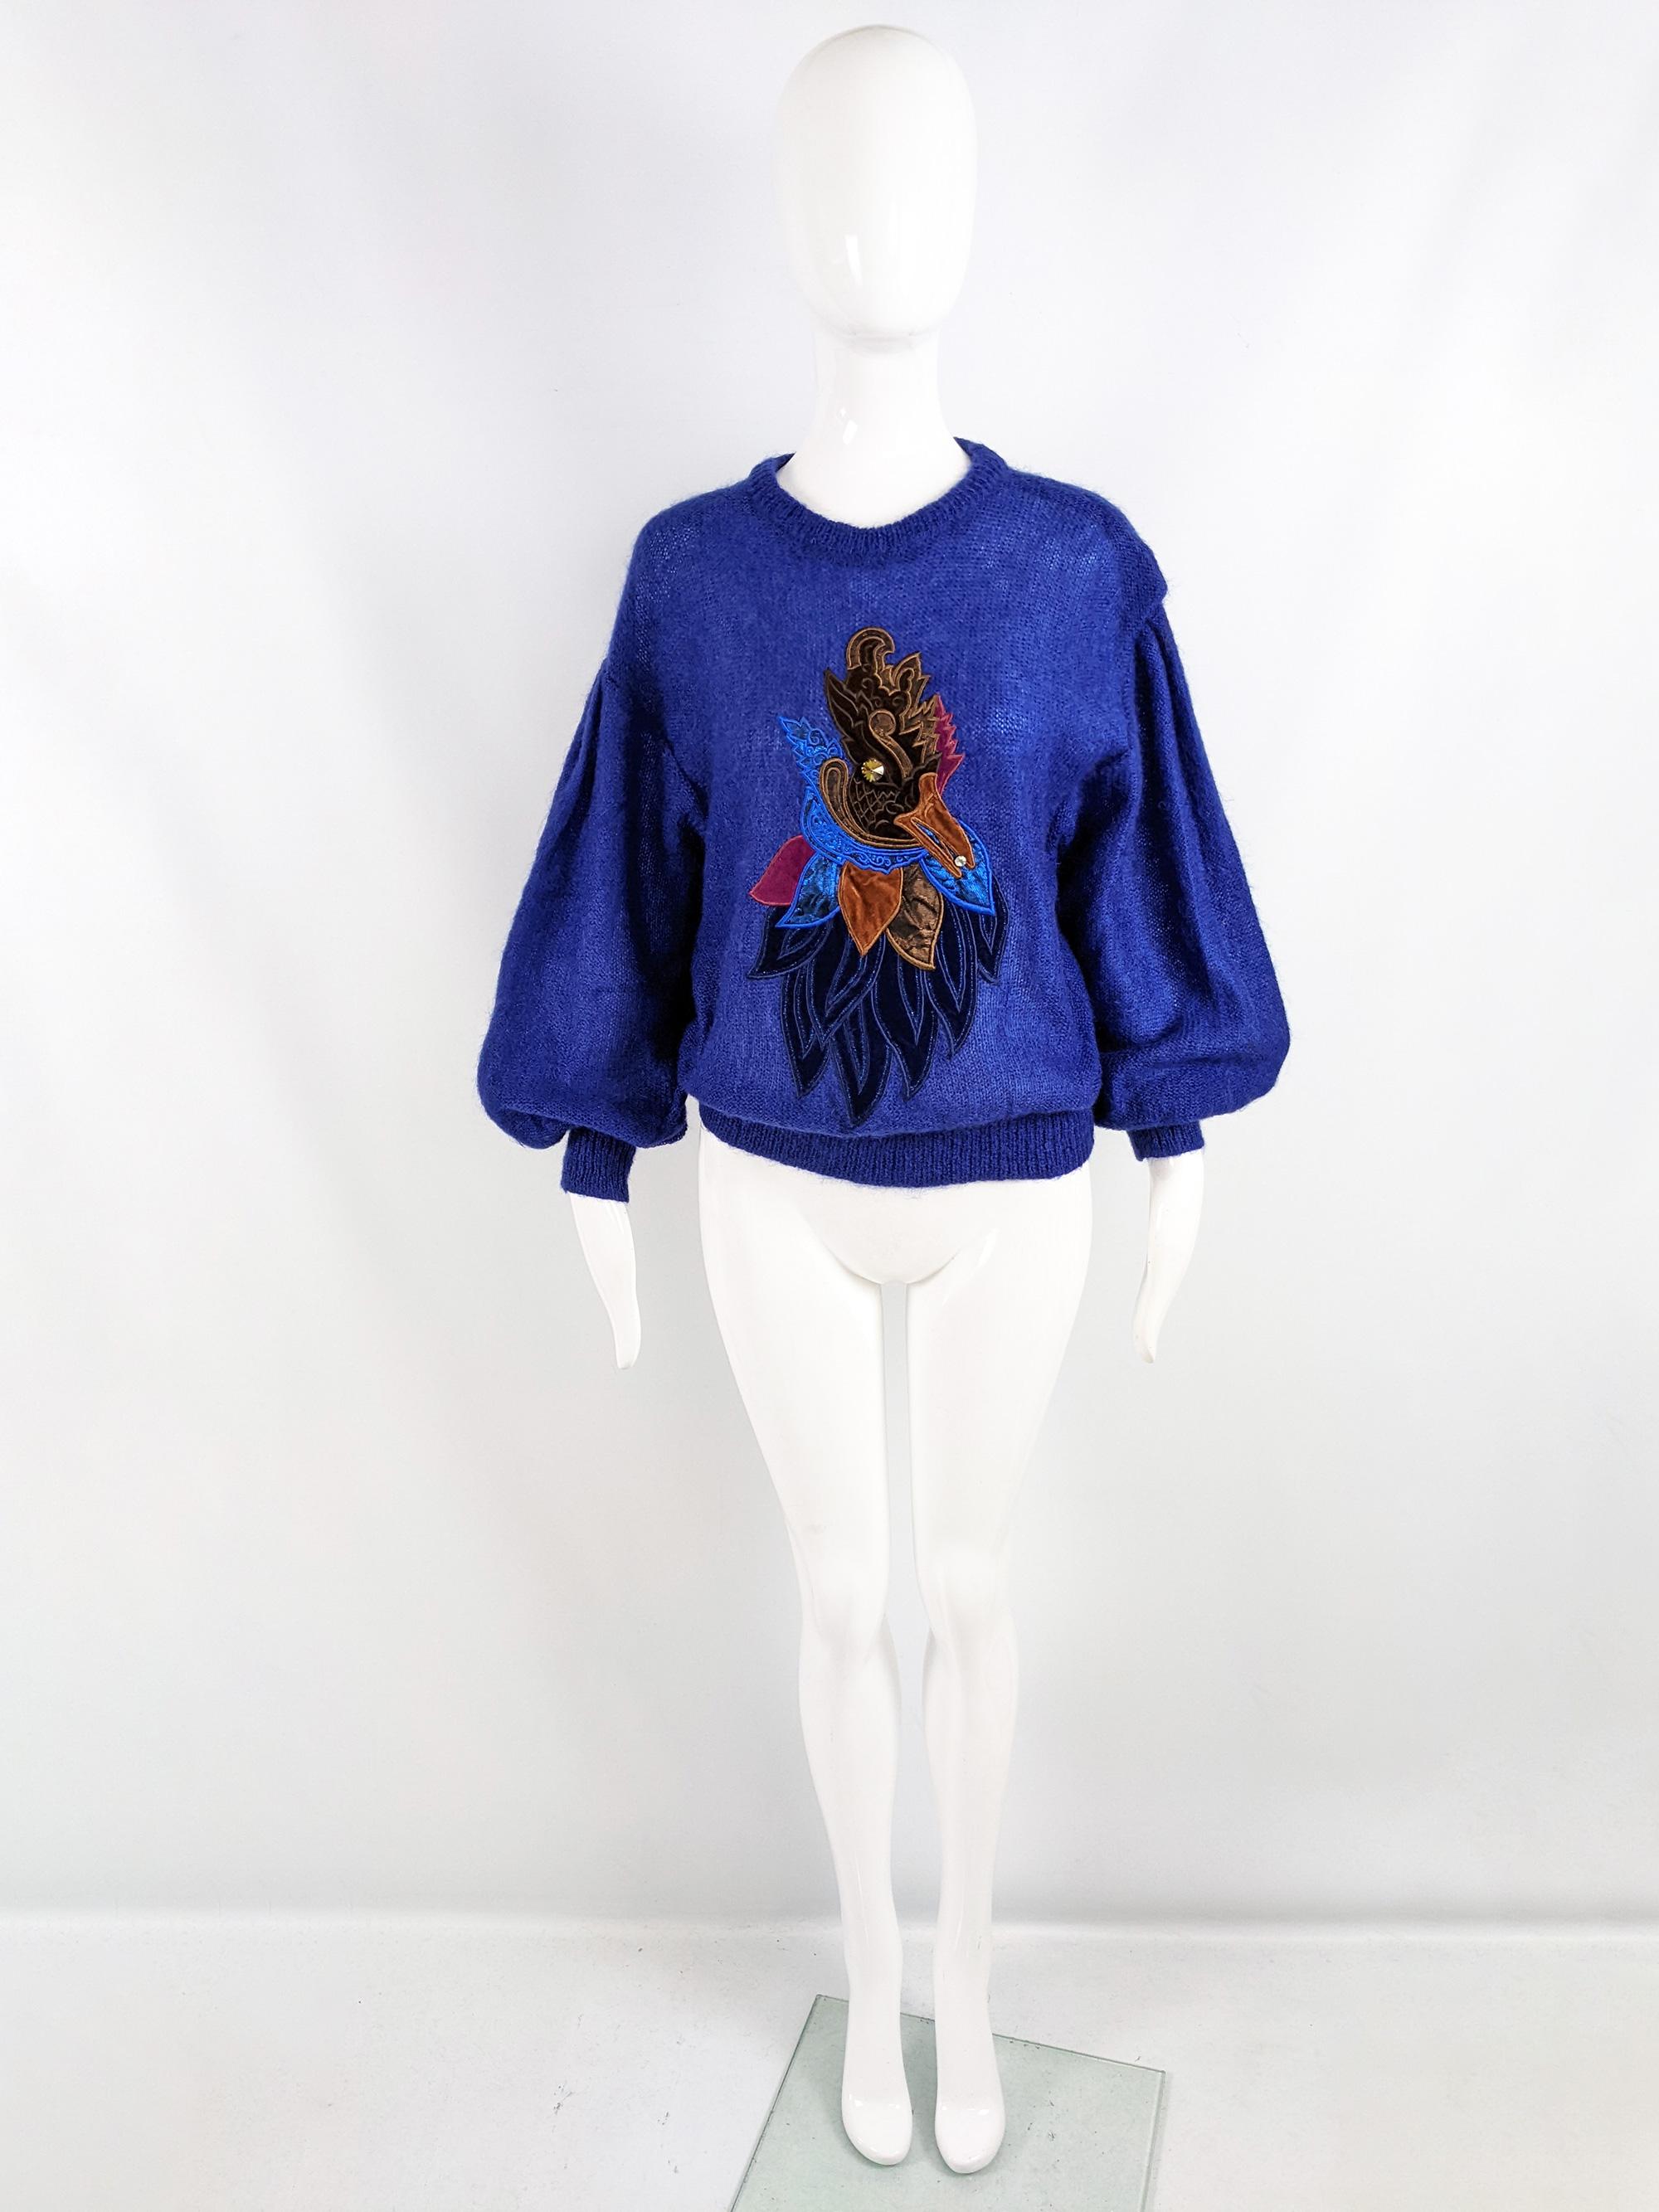 A fabulous vintage womens sweater from the 80s by luxury fashion house, Escada. In a dark blue mohair blend soft, fuzzy knit fabric. It has huge puffed sleeves with dropped shoulder seams and a bold rooster design in embroidered velvet appliqués on